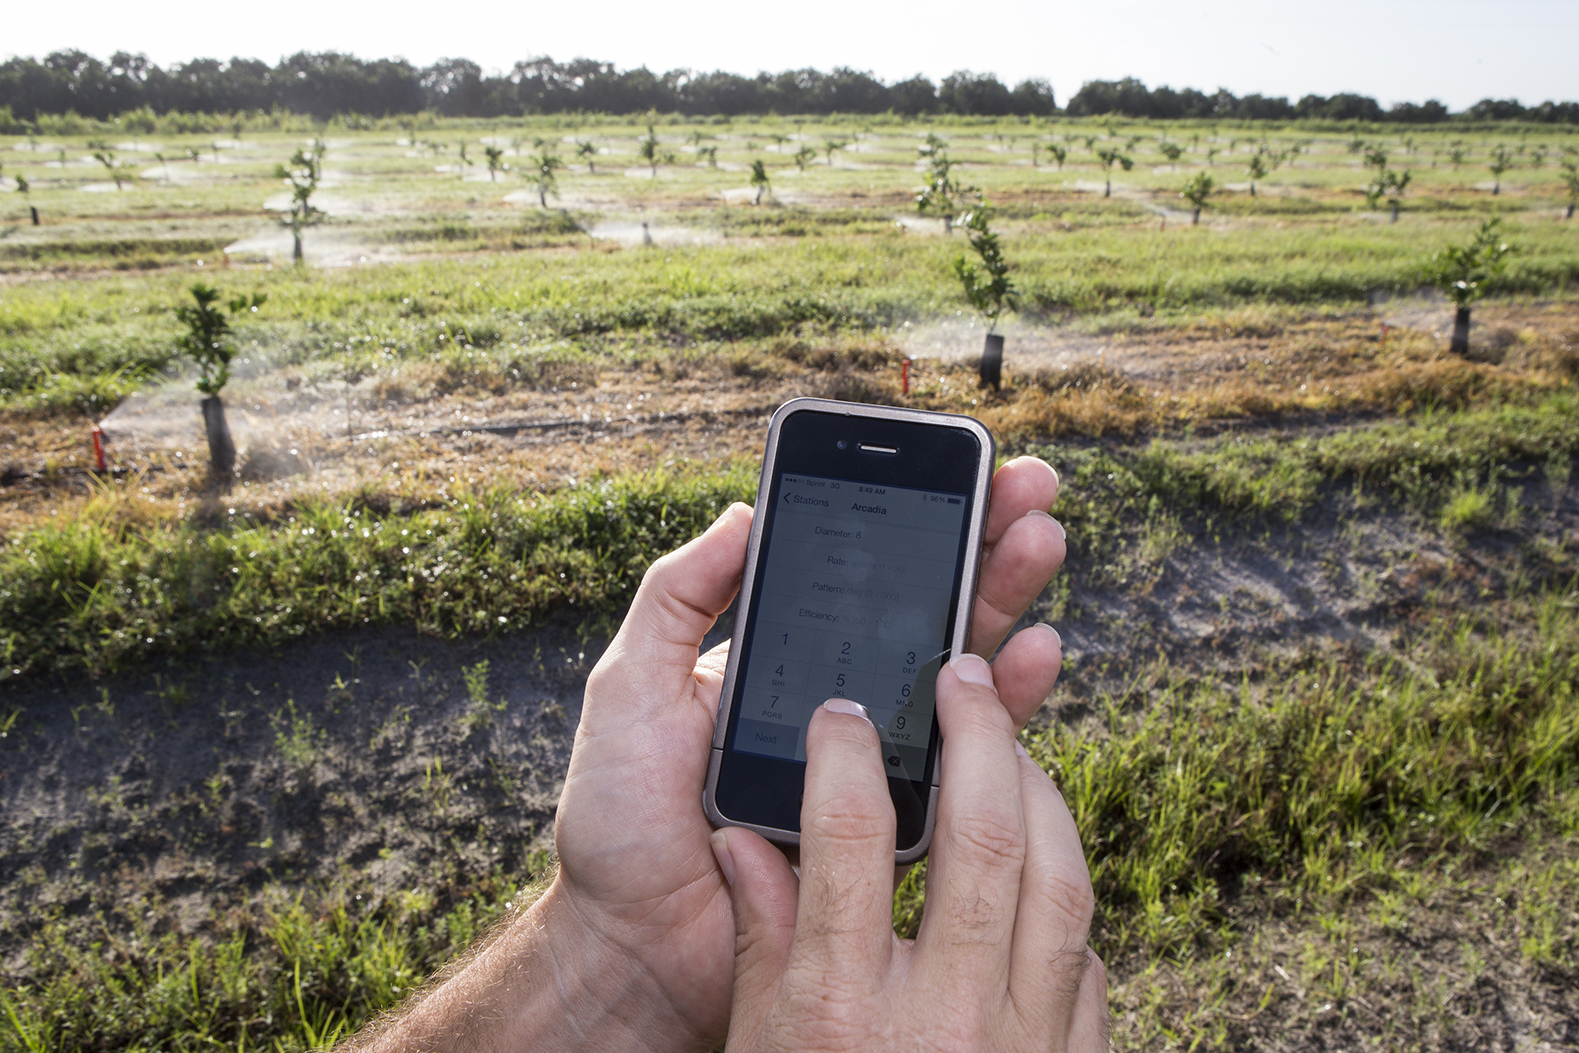 close up photo of an iPhone in a man's hand in a field